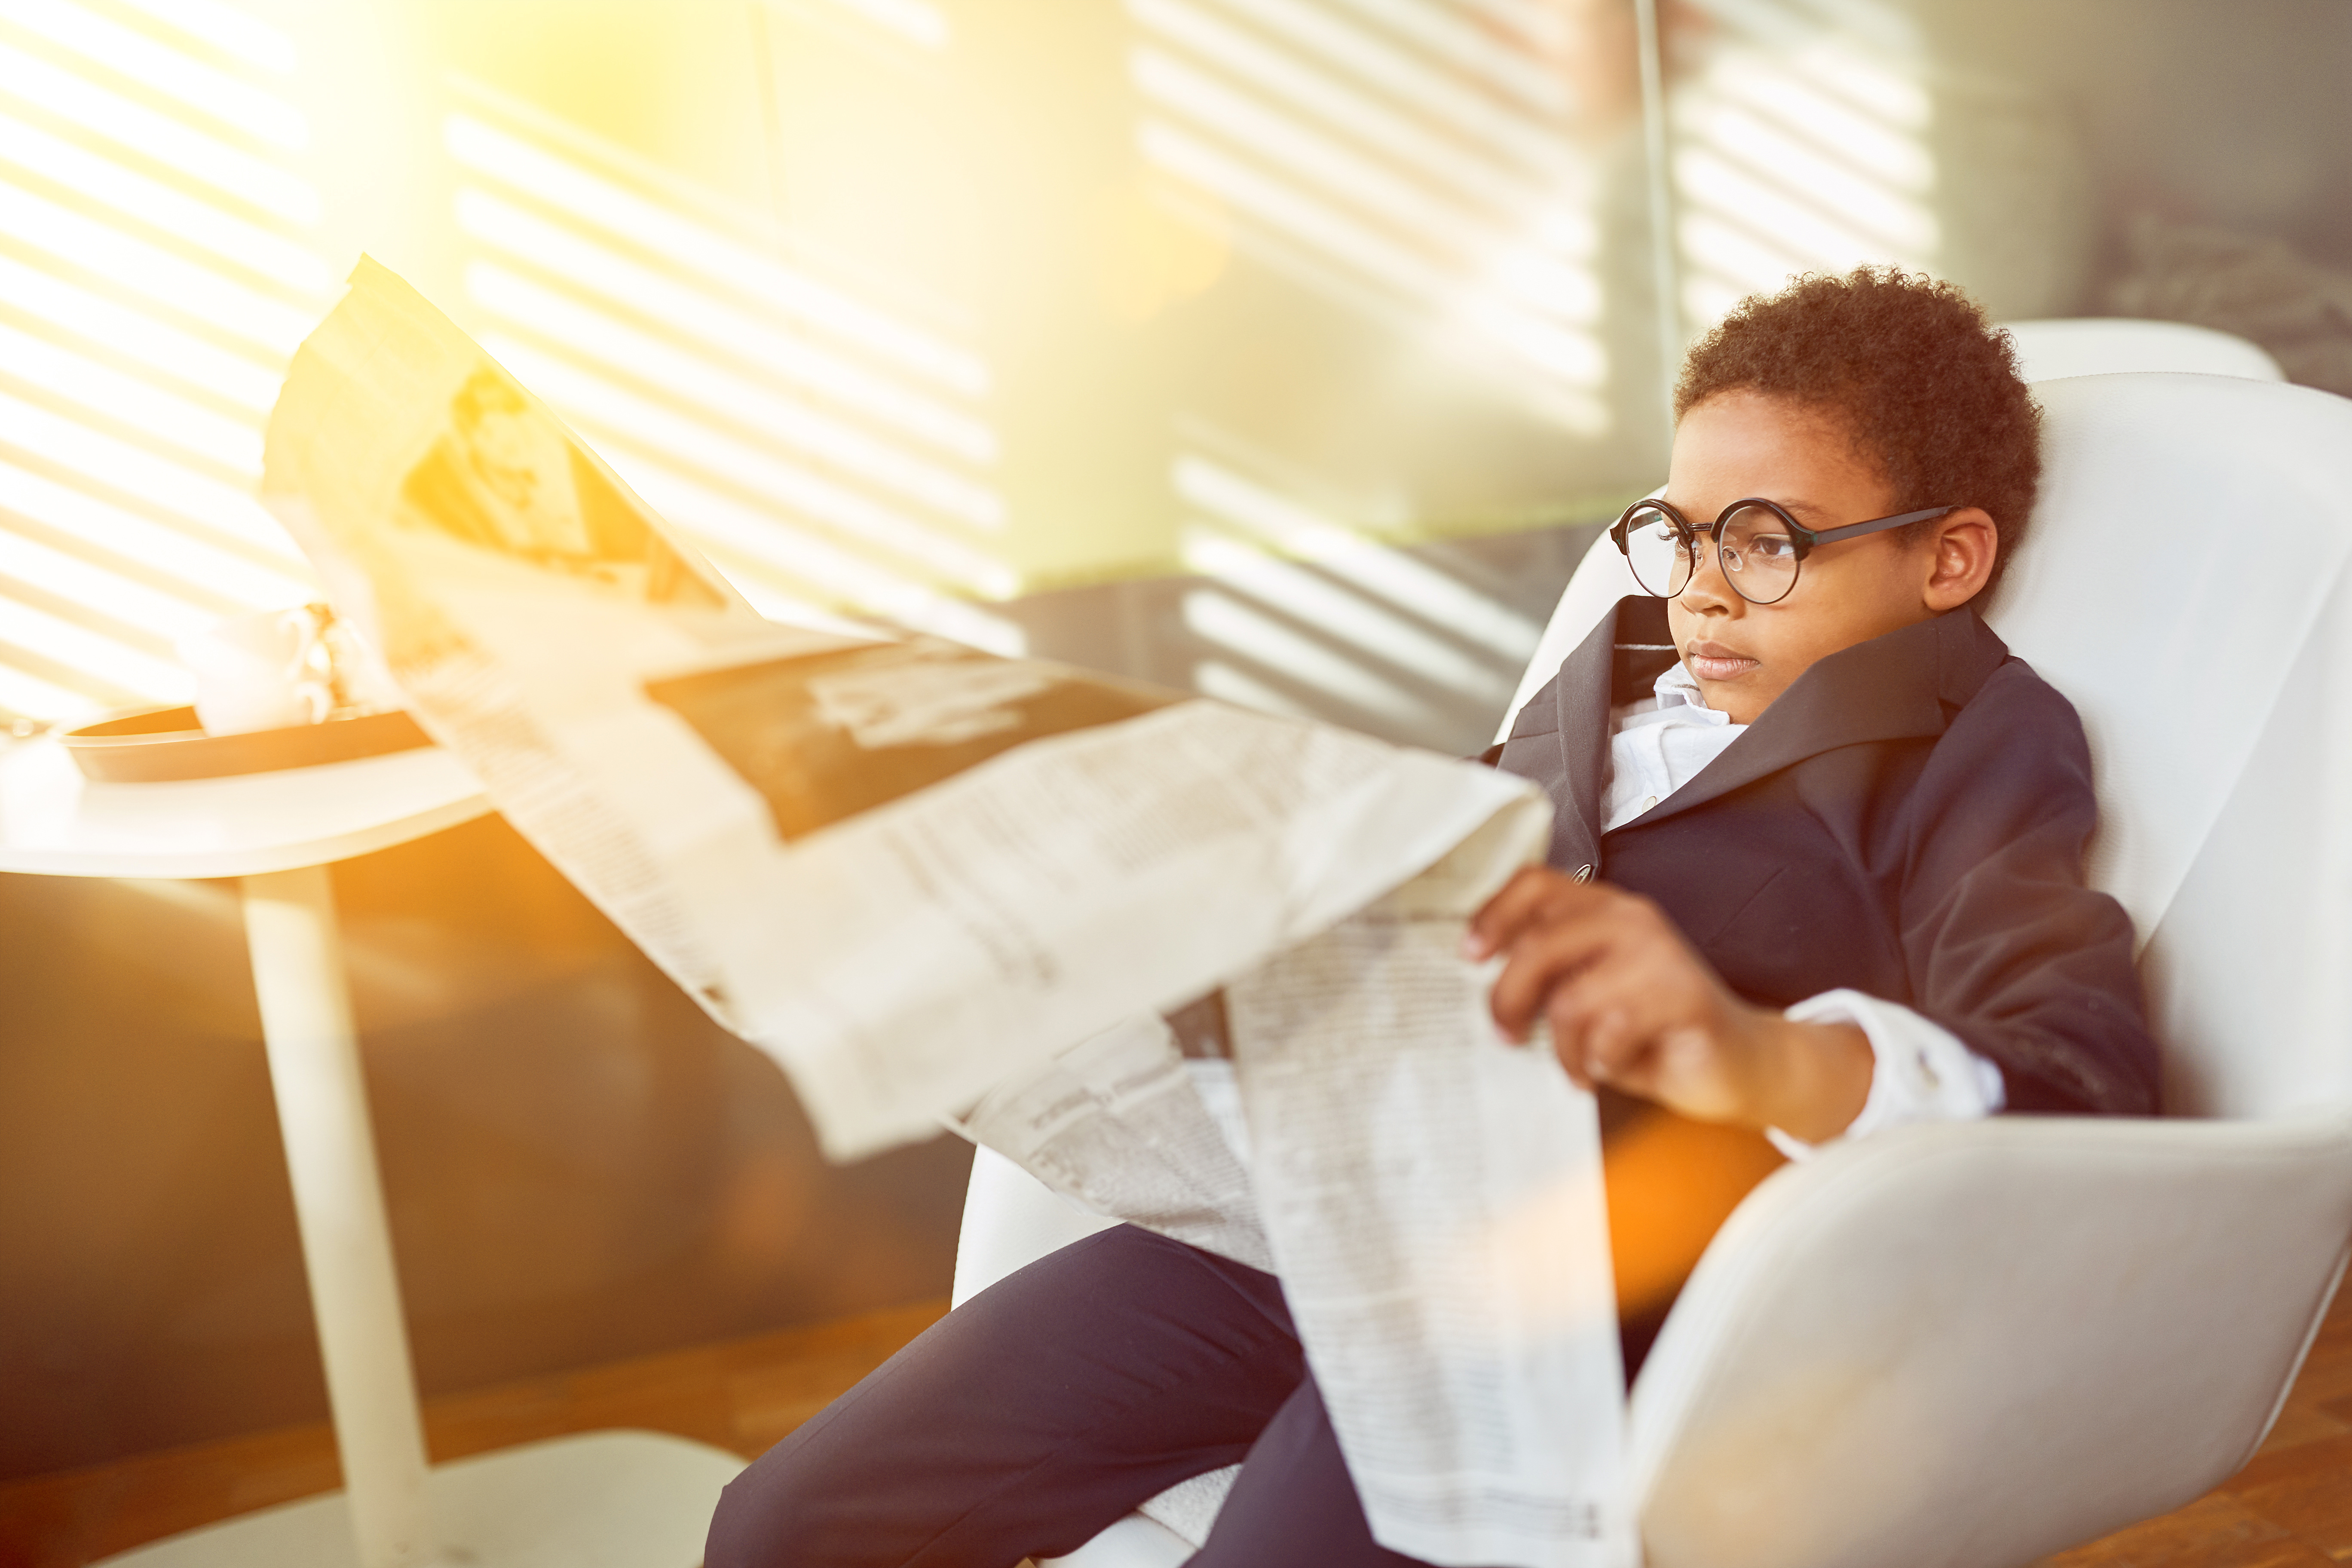 A young boy wearing a suit and spectacles reading the newspaper | Source: Shutterstock